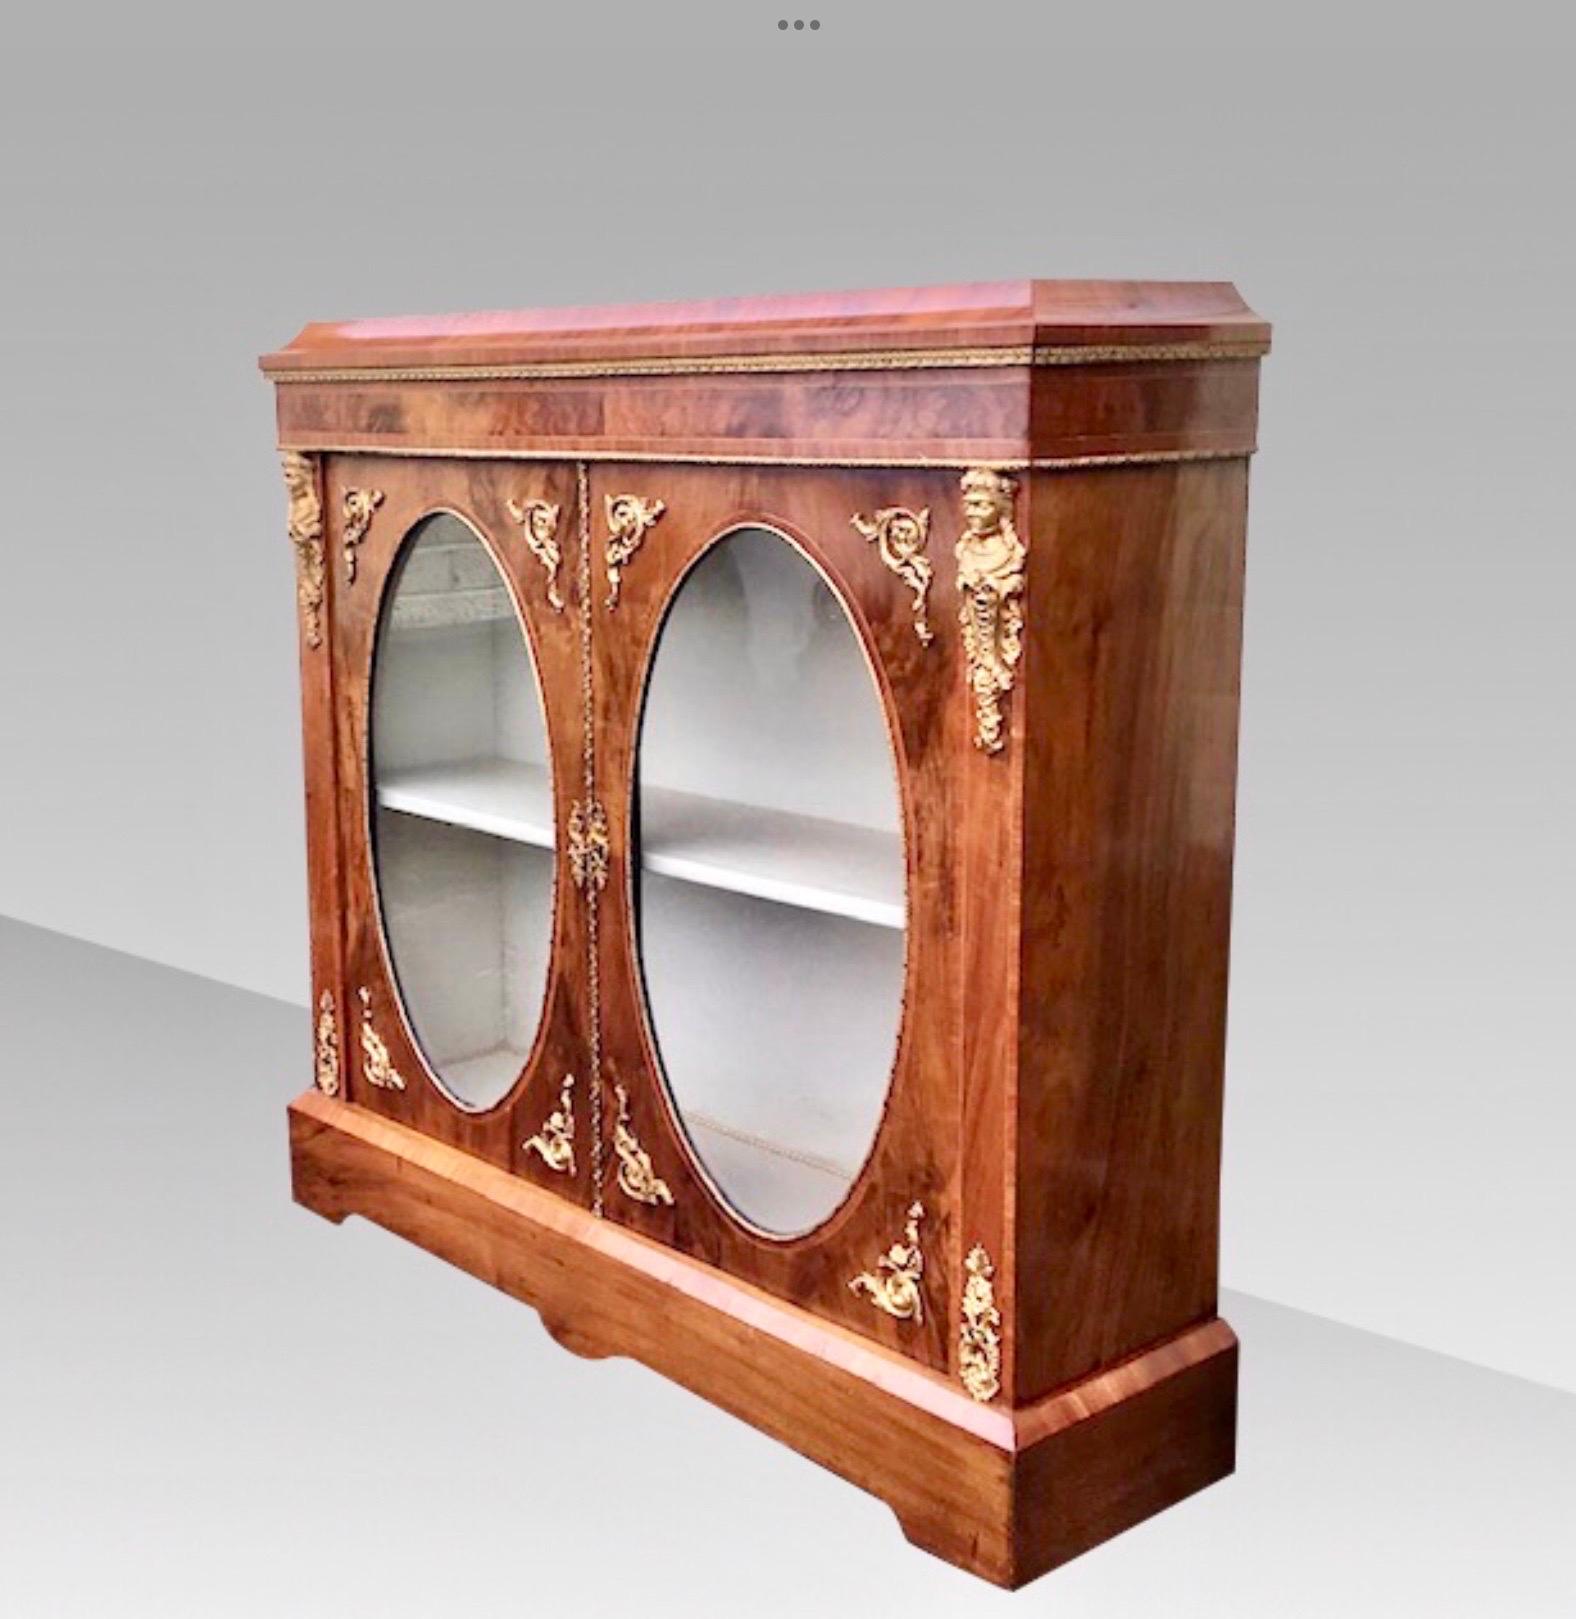 Stunning quality figured inlaid walnut ormolu mounted two doored Antique Victorian pier cabinet with oval glass panes and caddy top
Beautifully relined inside with rich cream material.
Measures: 46 ins wide x 43.25 ins x 12.25 ins deep.
Circa